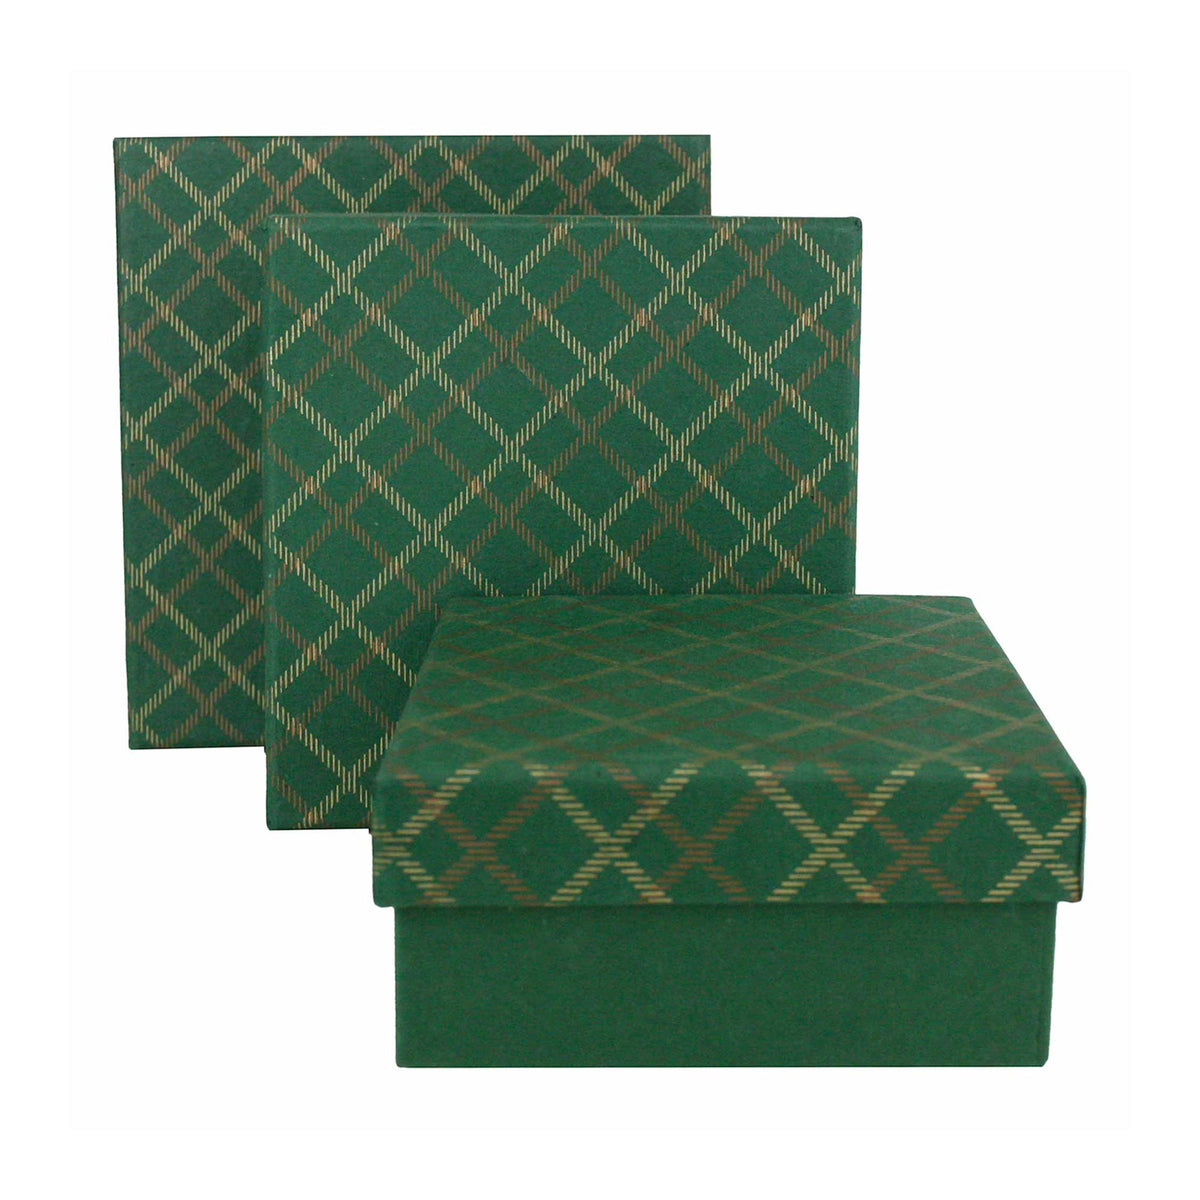 Handcrafted Chequered Green Gift Boxes - Set of 3